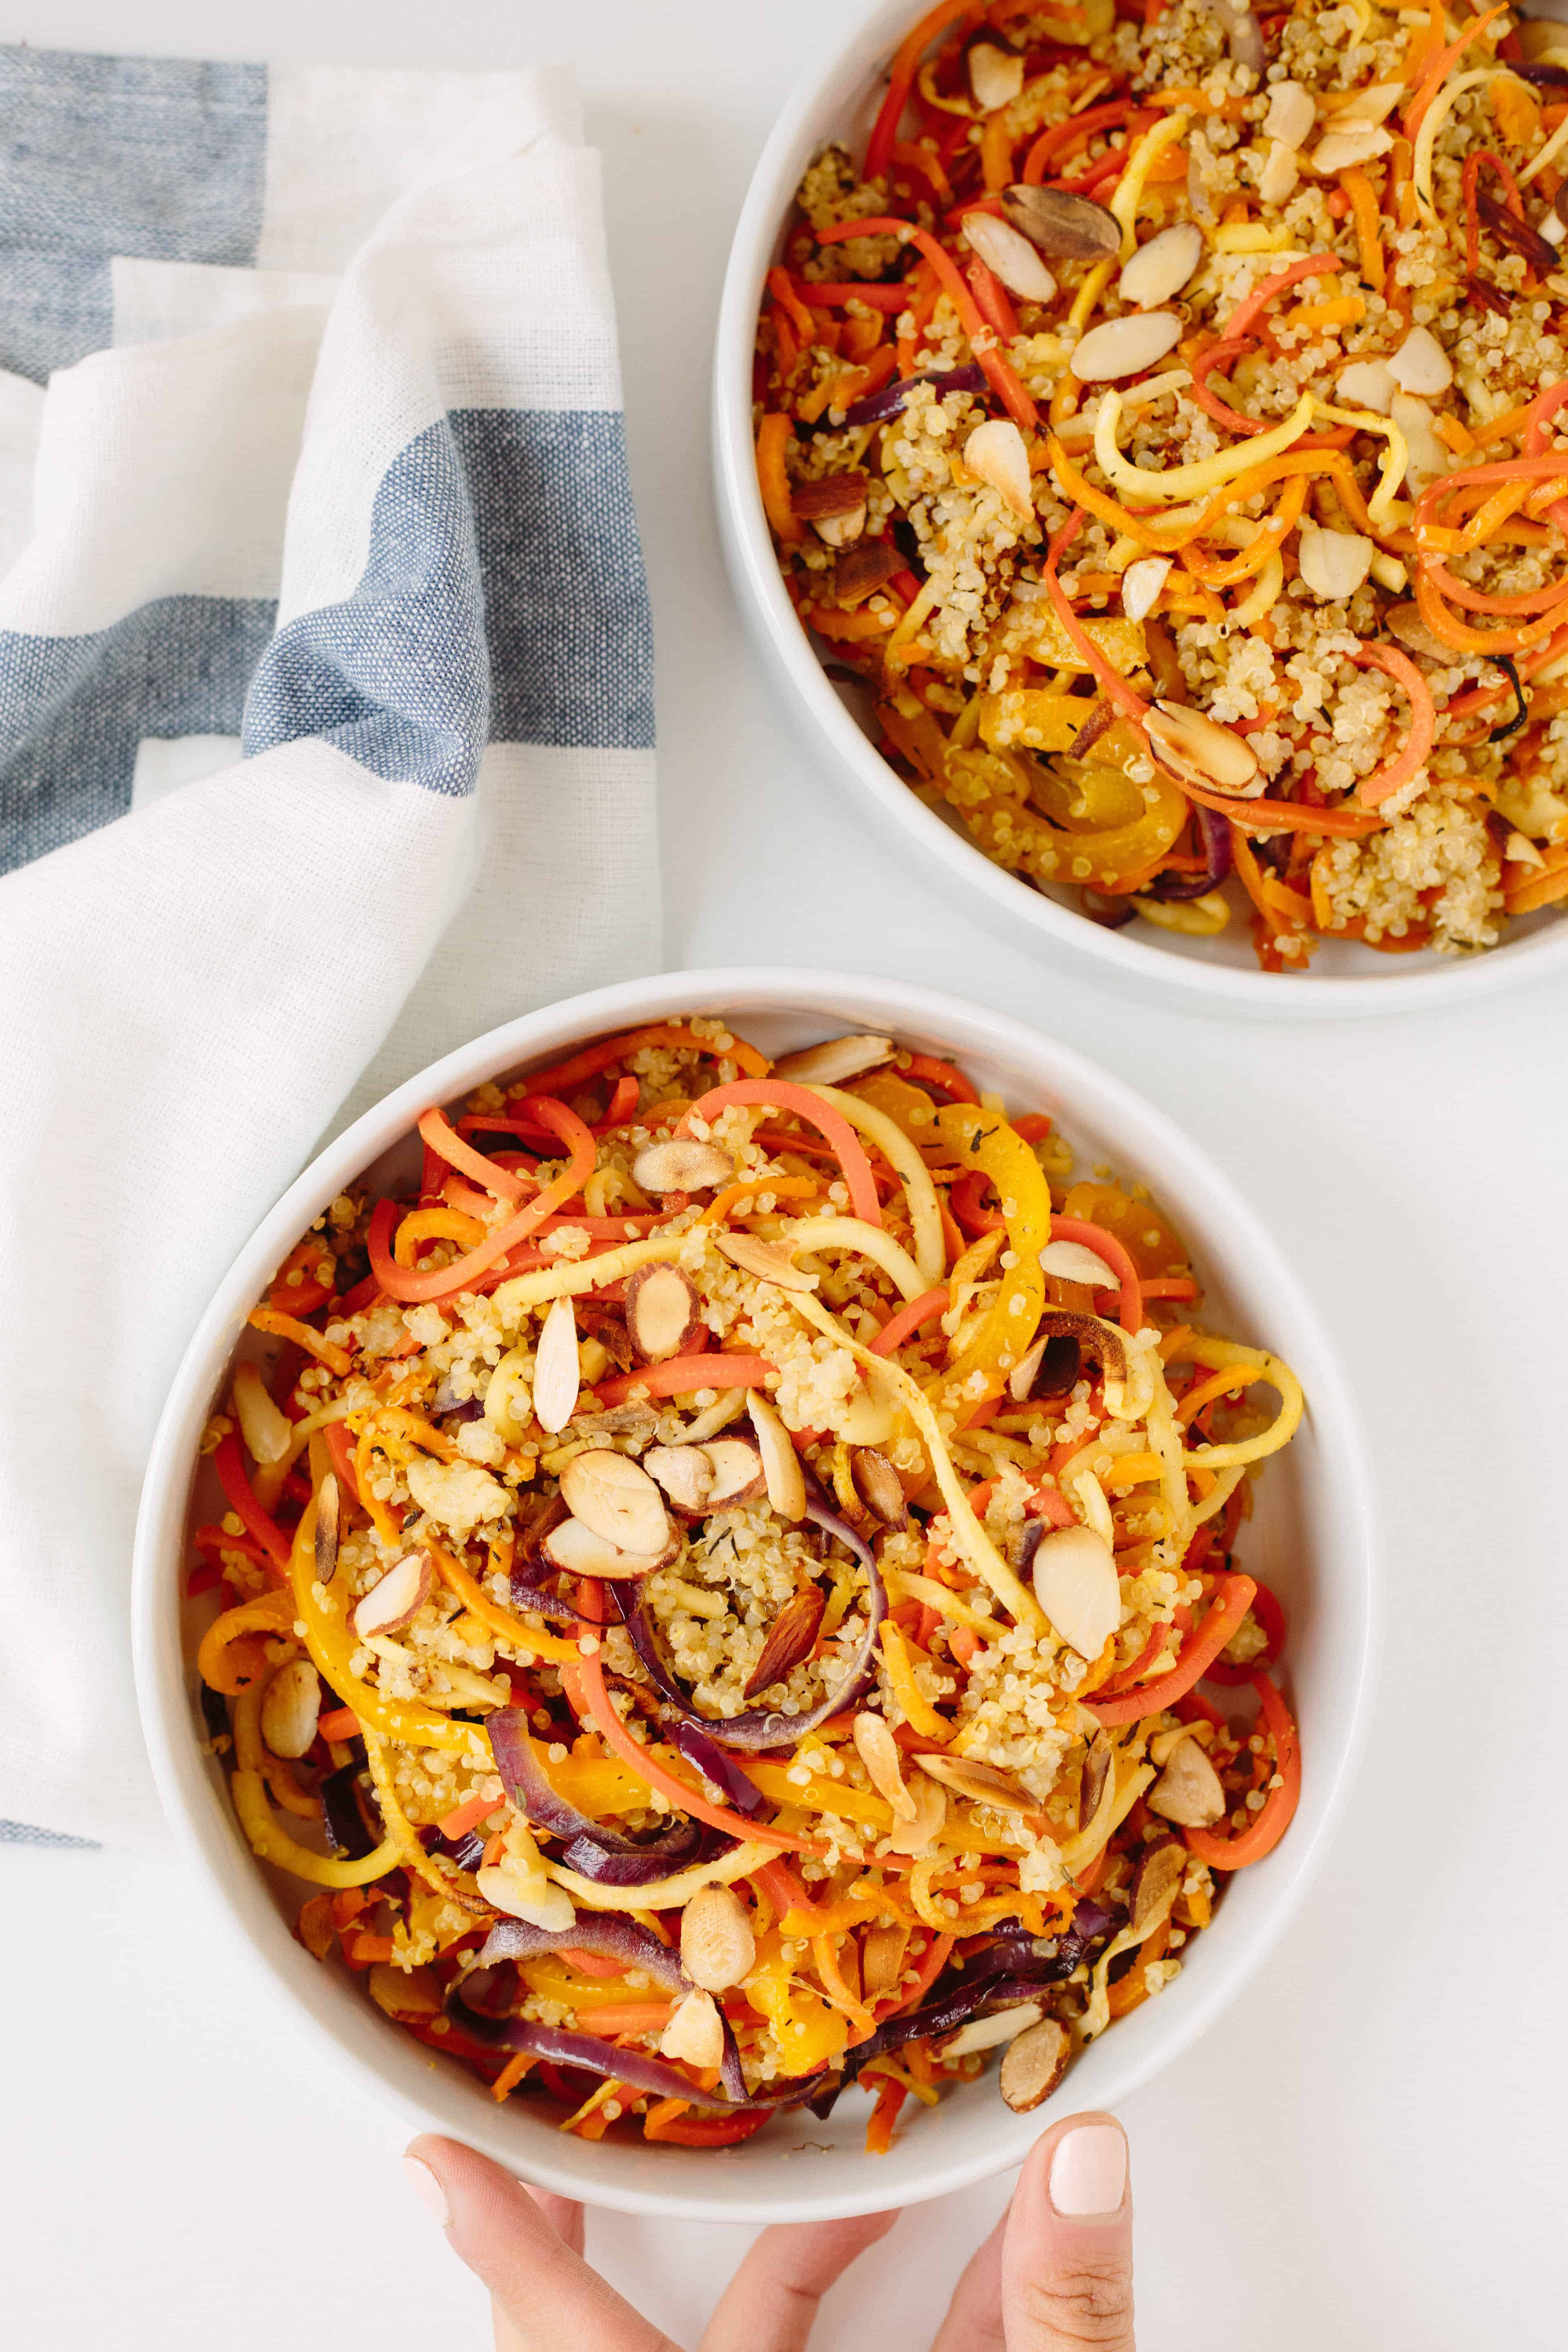 Roasted Spiralized Vegetable and Quinoa Bowl